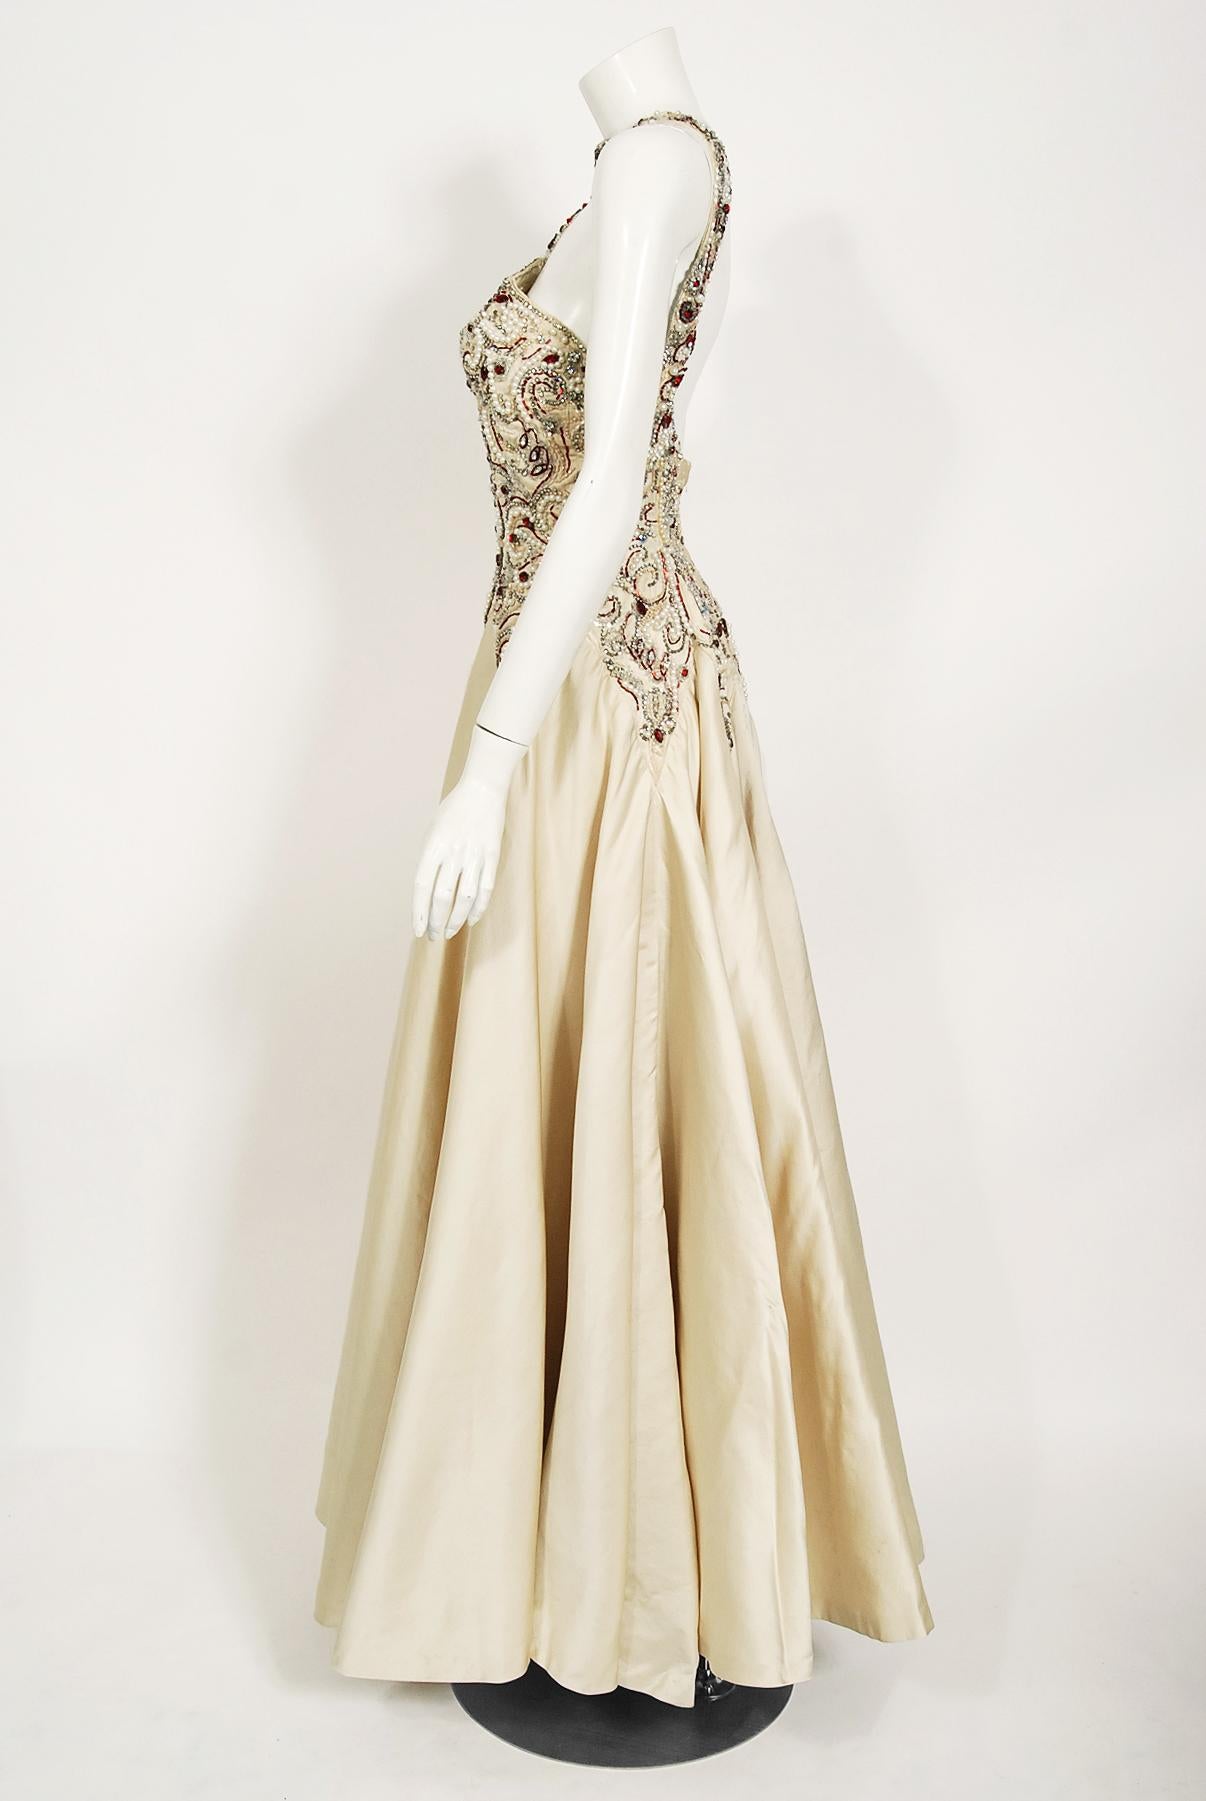 Iconic 1996 Madonna 'Evita' Film-Worn Beaded Ivory Silk Couture Archival Gown For Sale 5